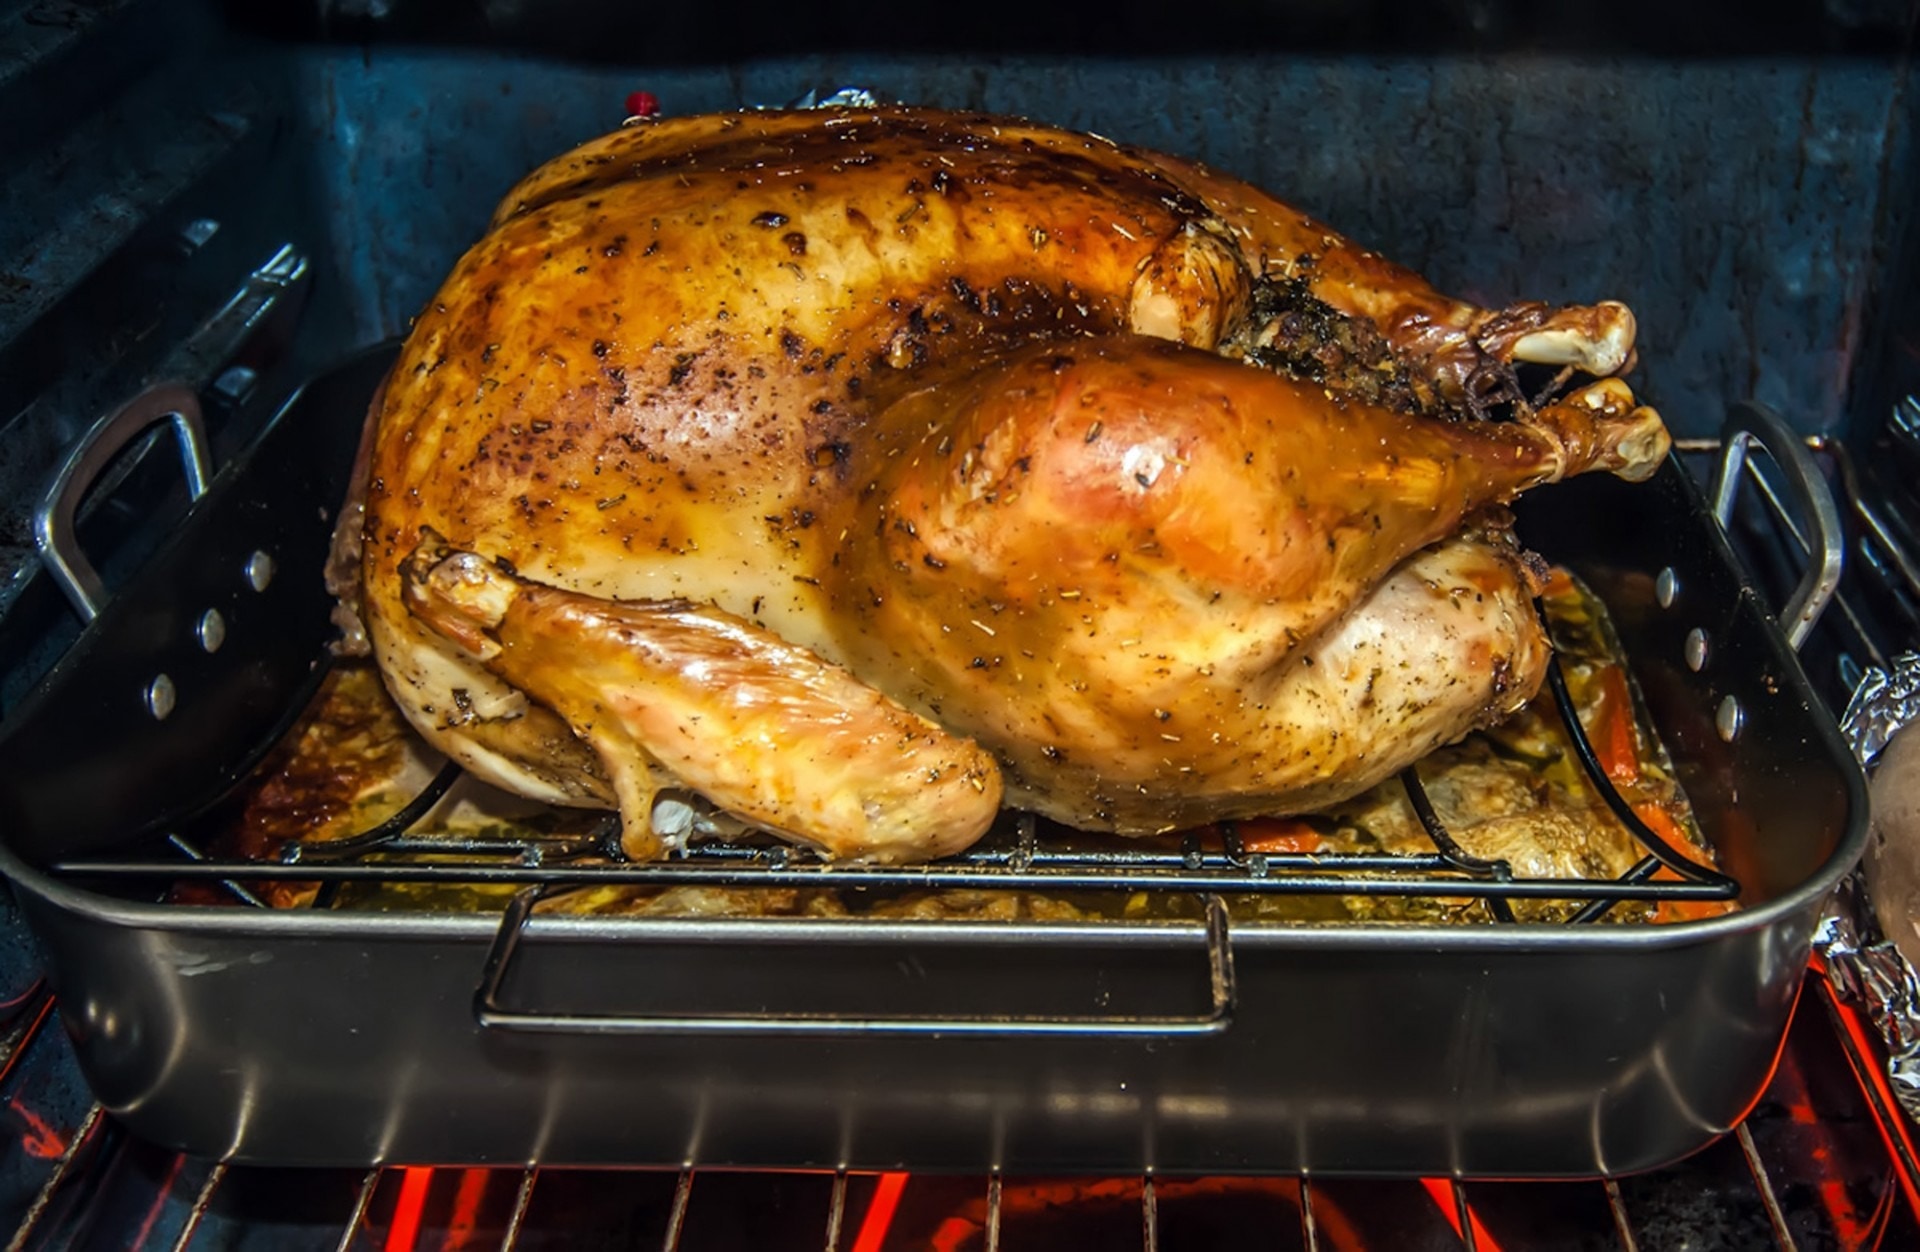 Turkey, Cooking, Dinner, Meal, Oven, roasted, roast chicken